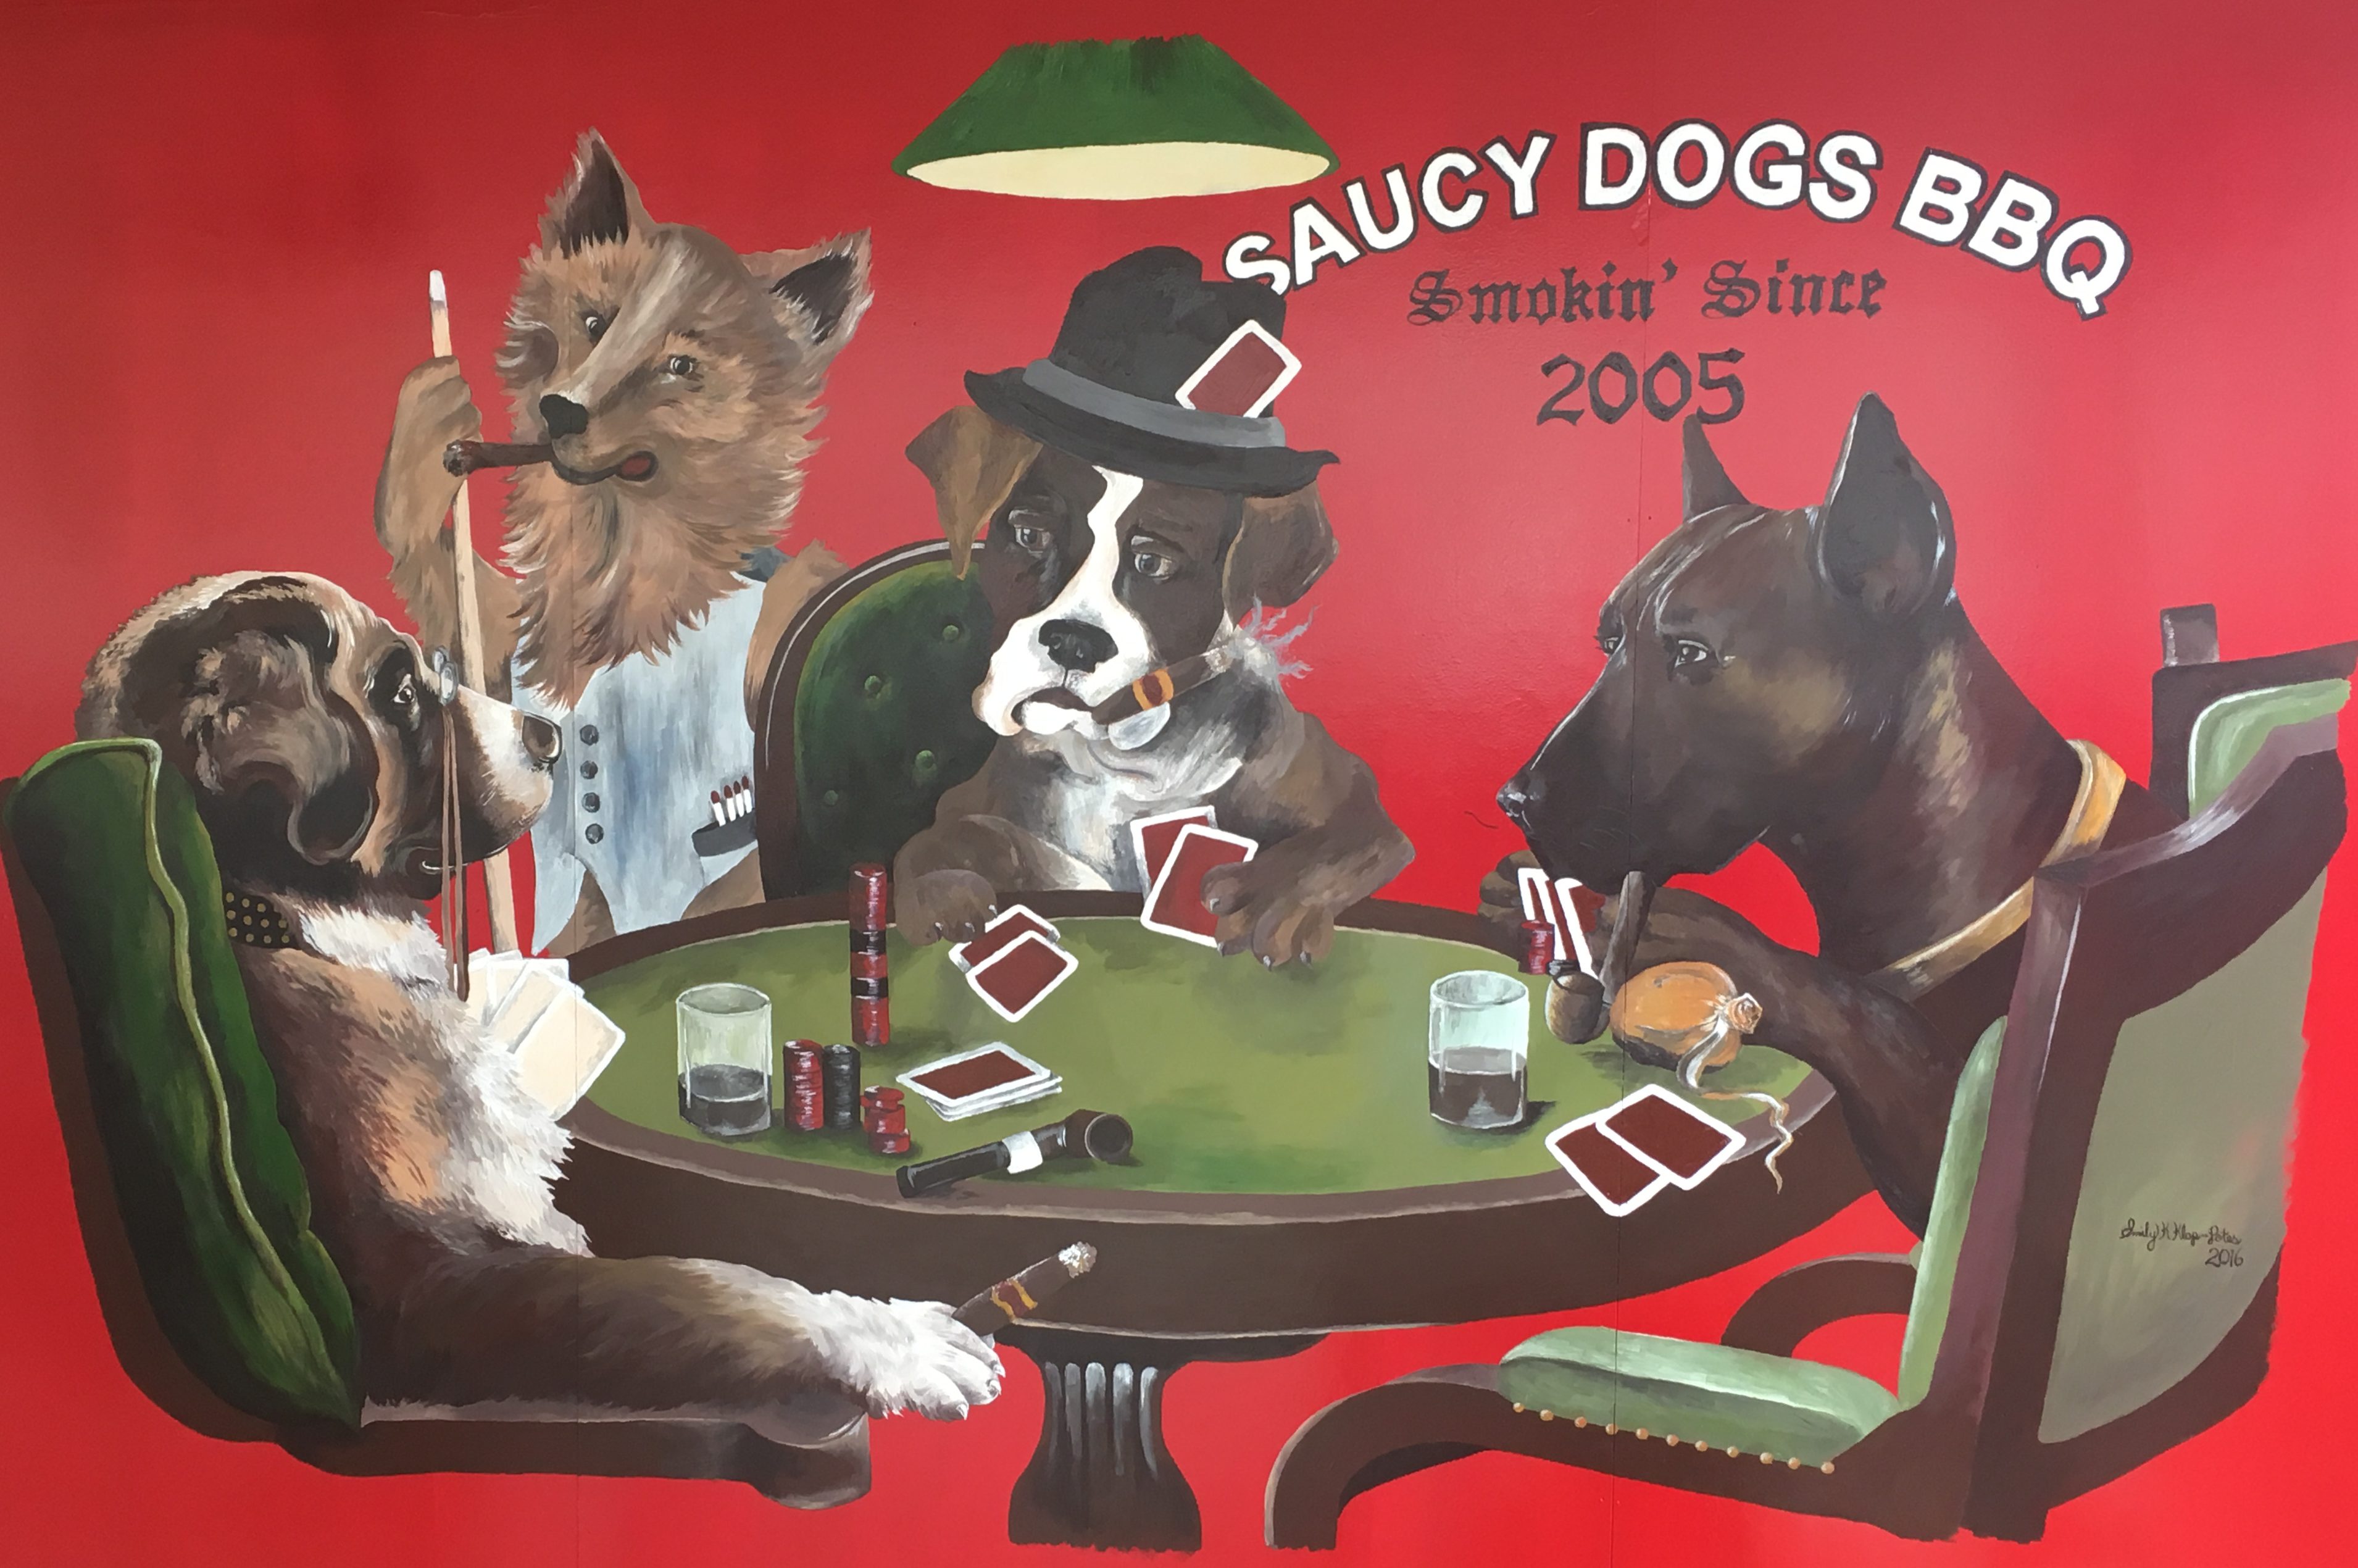 Saucy Dogs Barbeque in Jonesville Michigan. Best BBQ since 2005. Dogs playing cards agree.